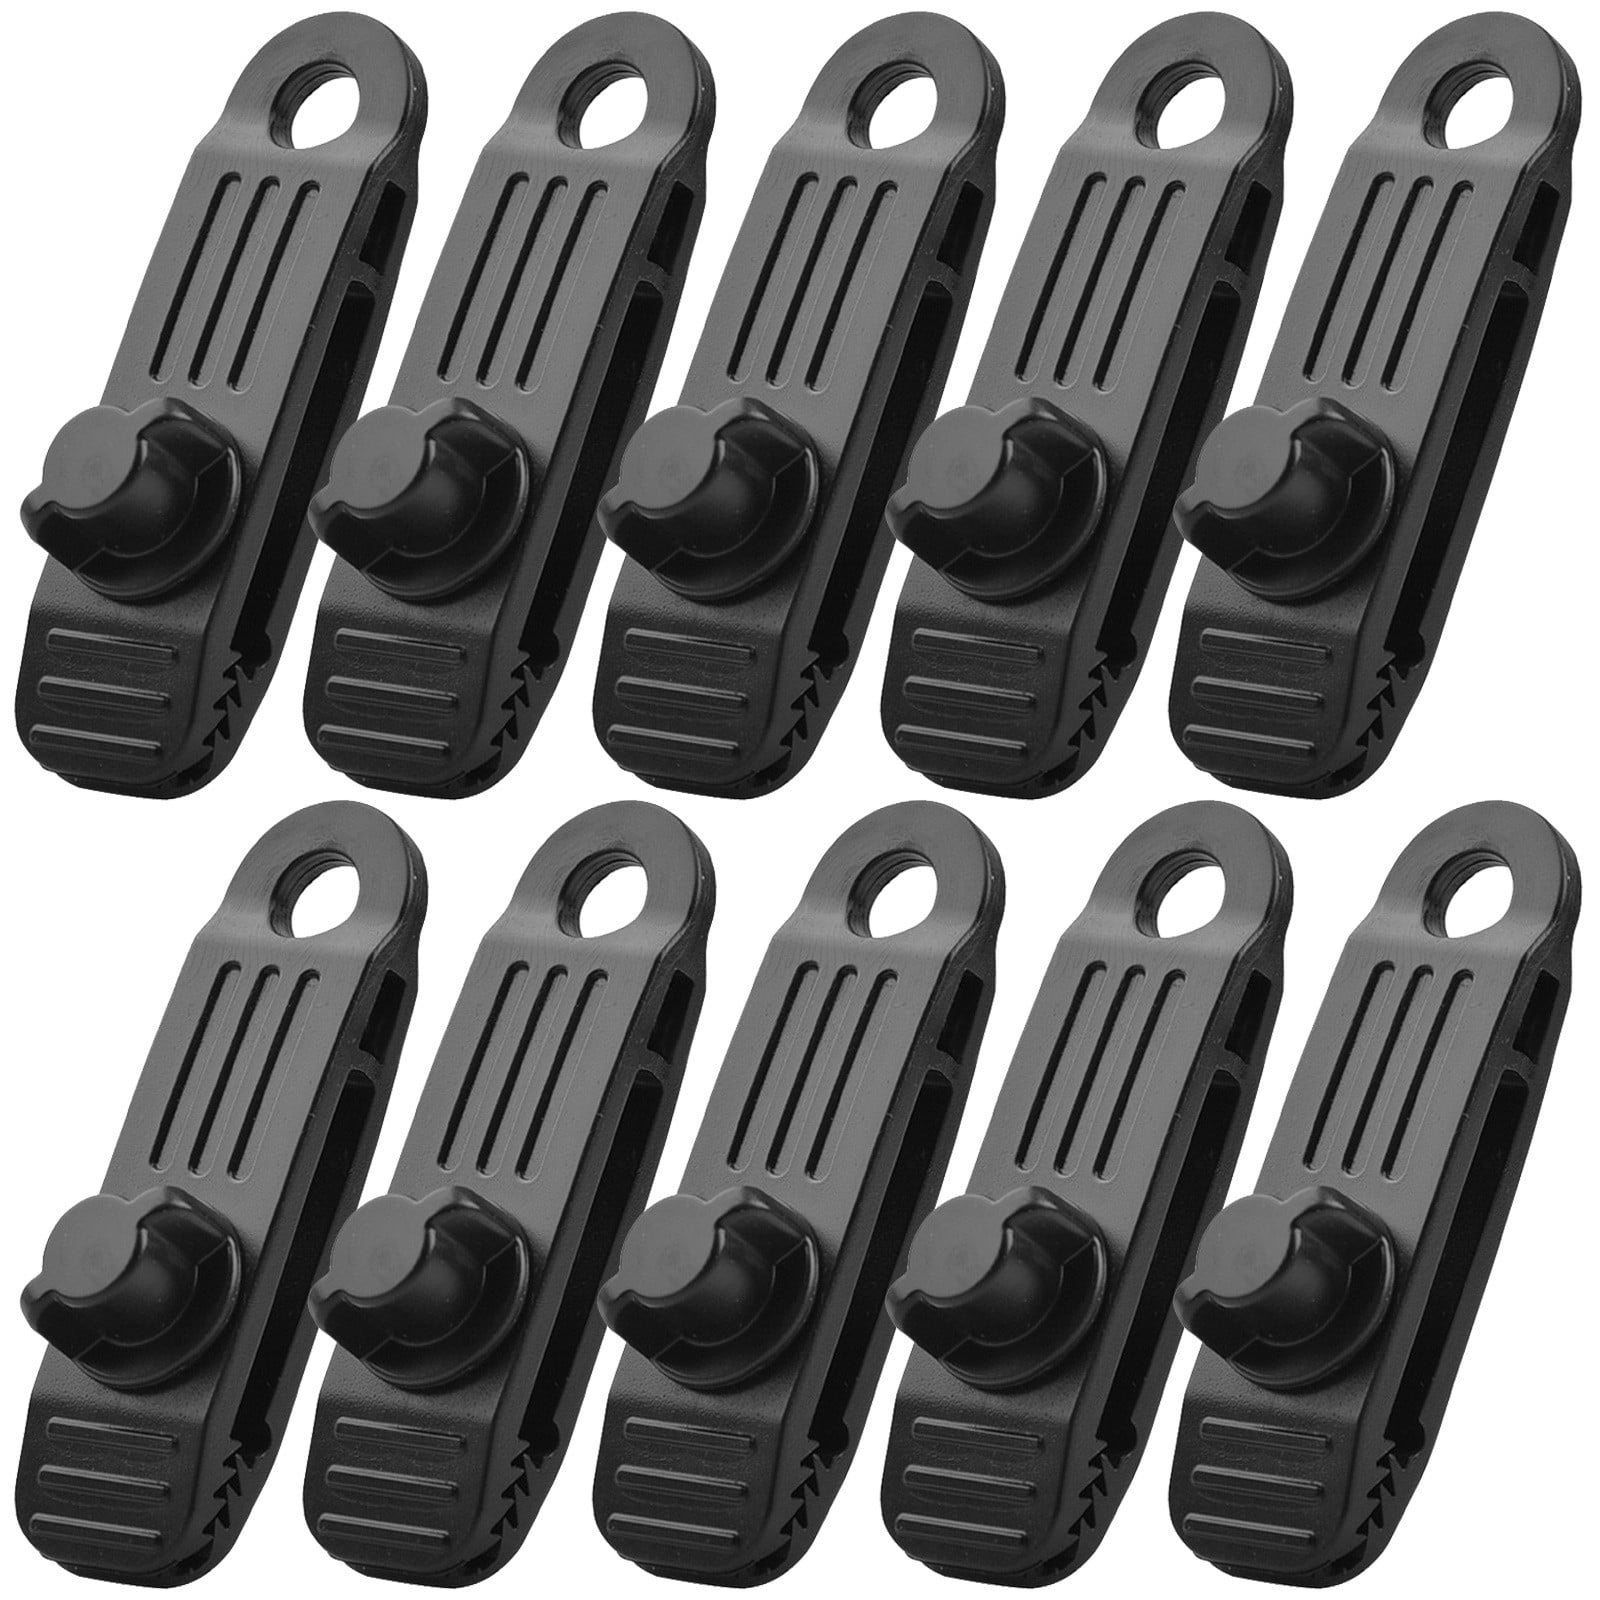 COVER CLIPS AWNING POOL BOAT PONTOON 30 pack Multi Purpose Heavy Duty 6" TARP 